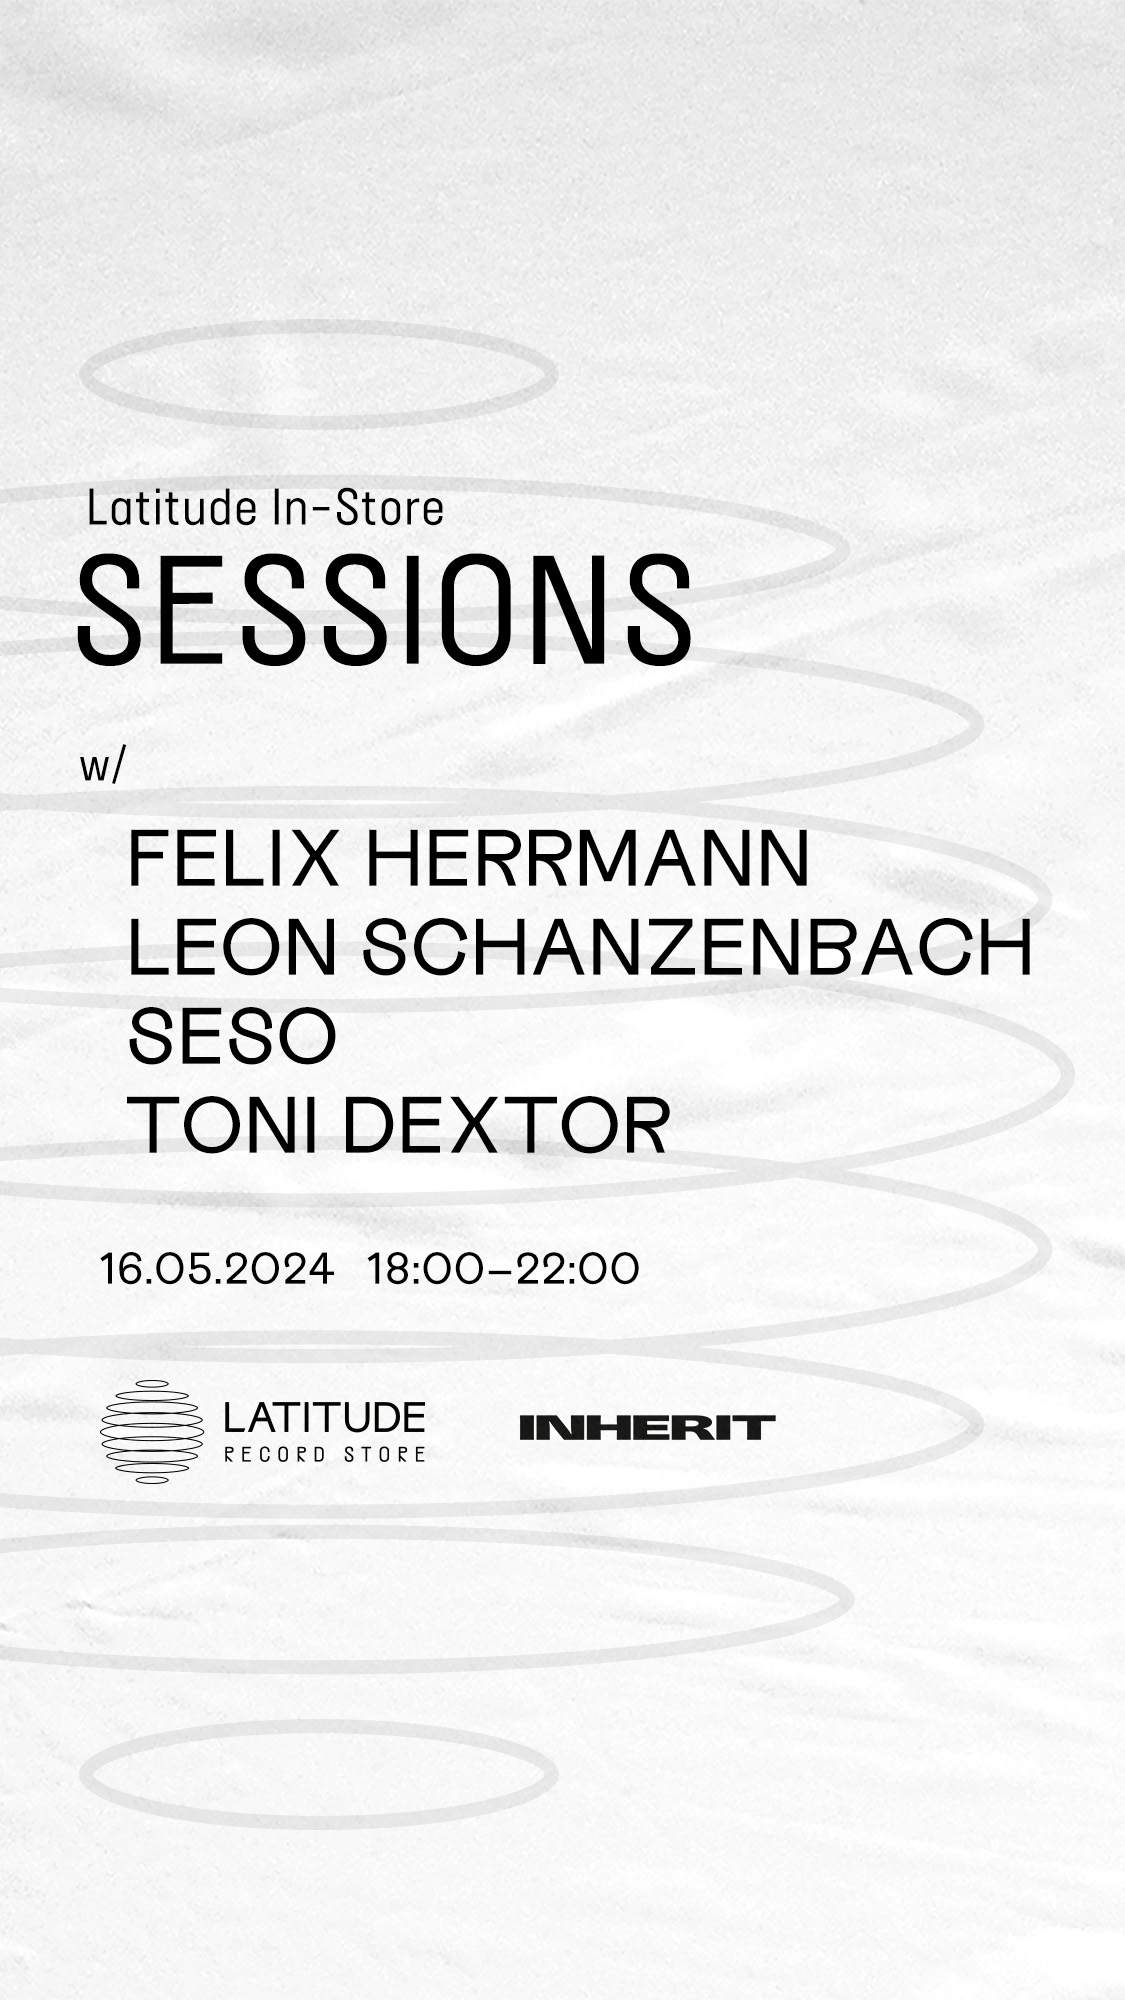 Latitude In-Store Sessions with Inherit Records - フライヤー表